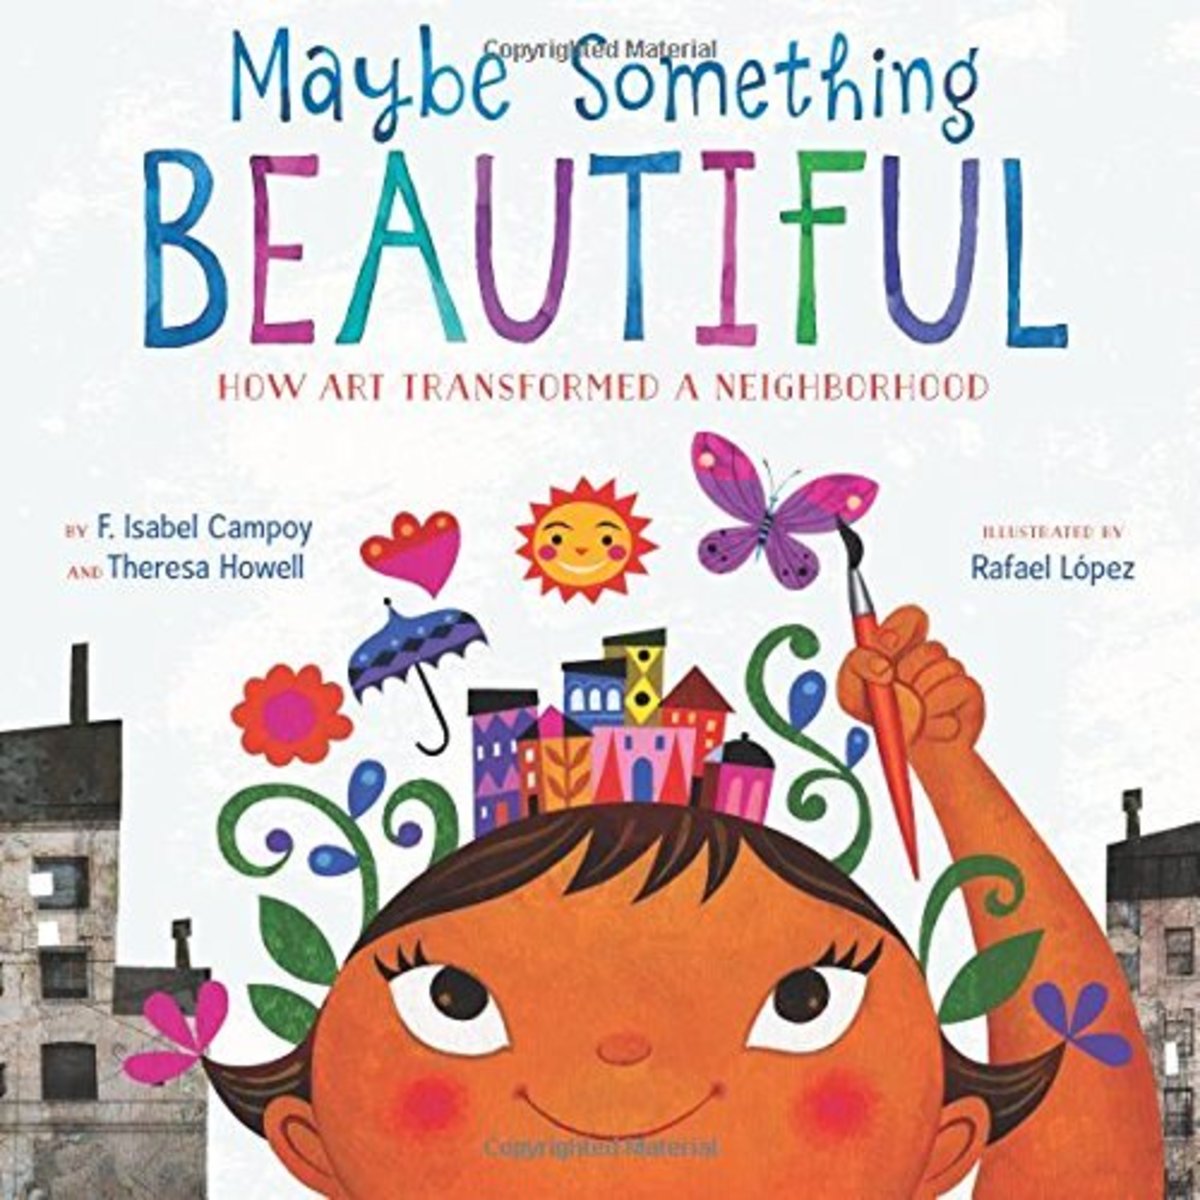 Maybe Something Beautiful by F. Isabel Campoy and Theresa Howell